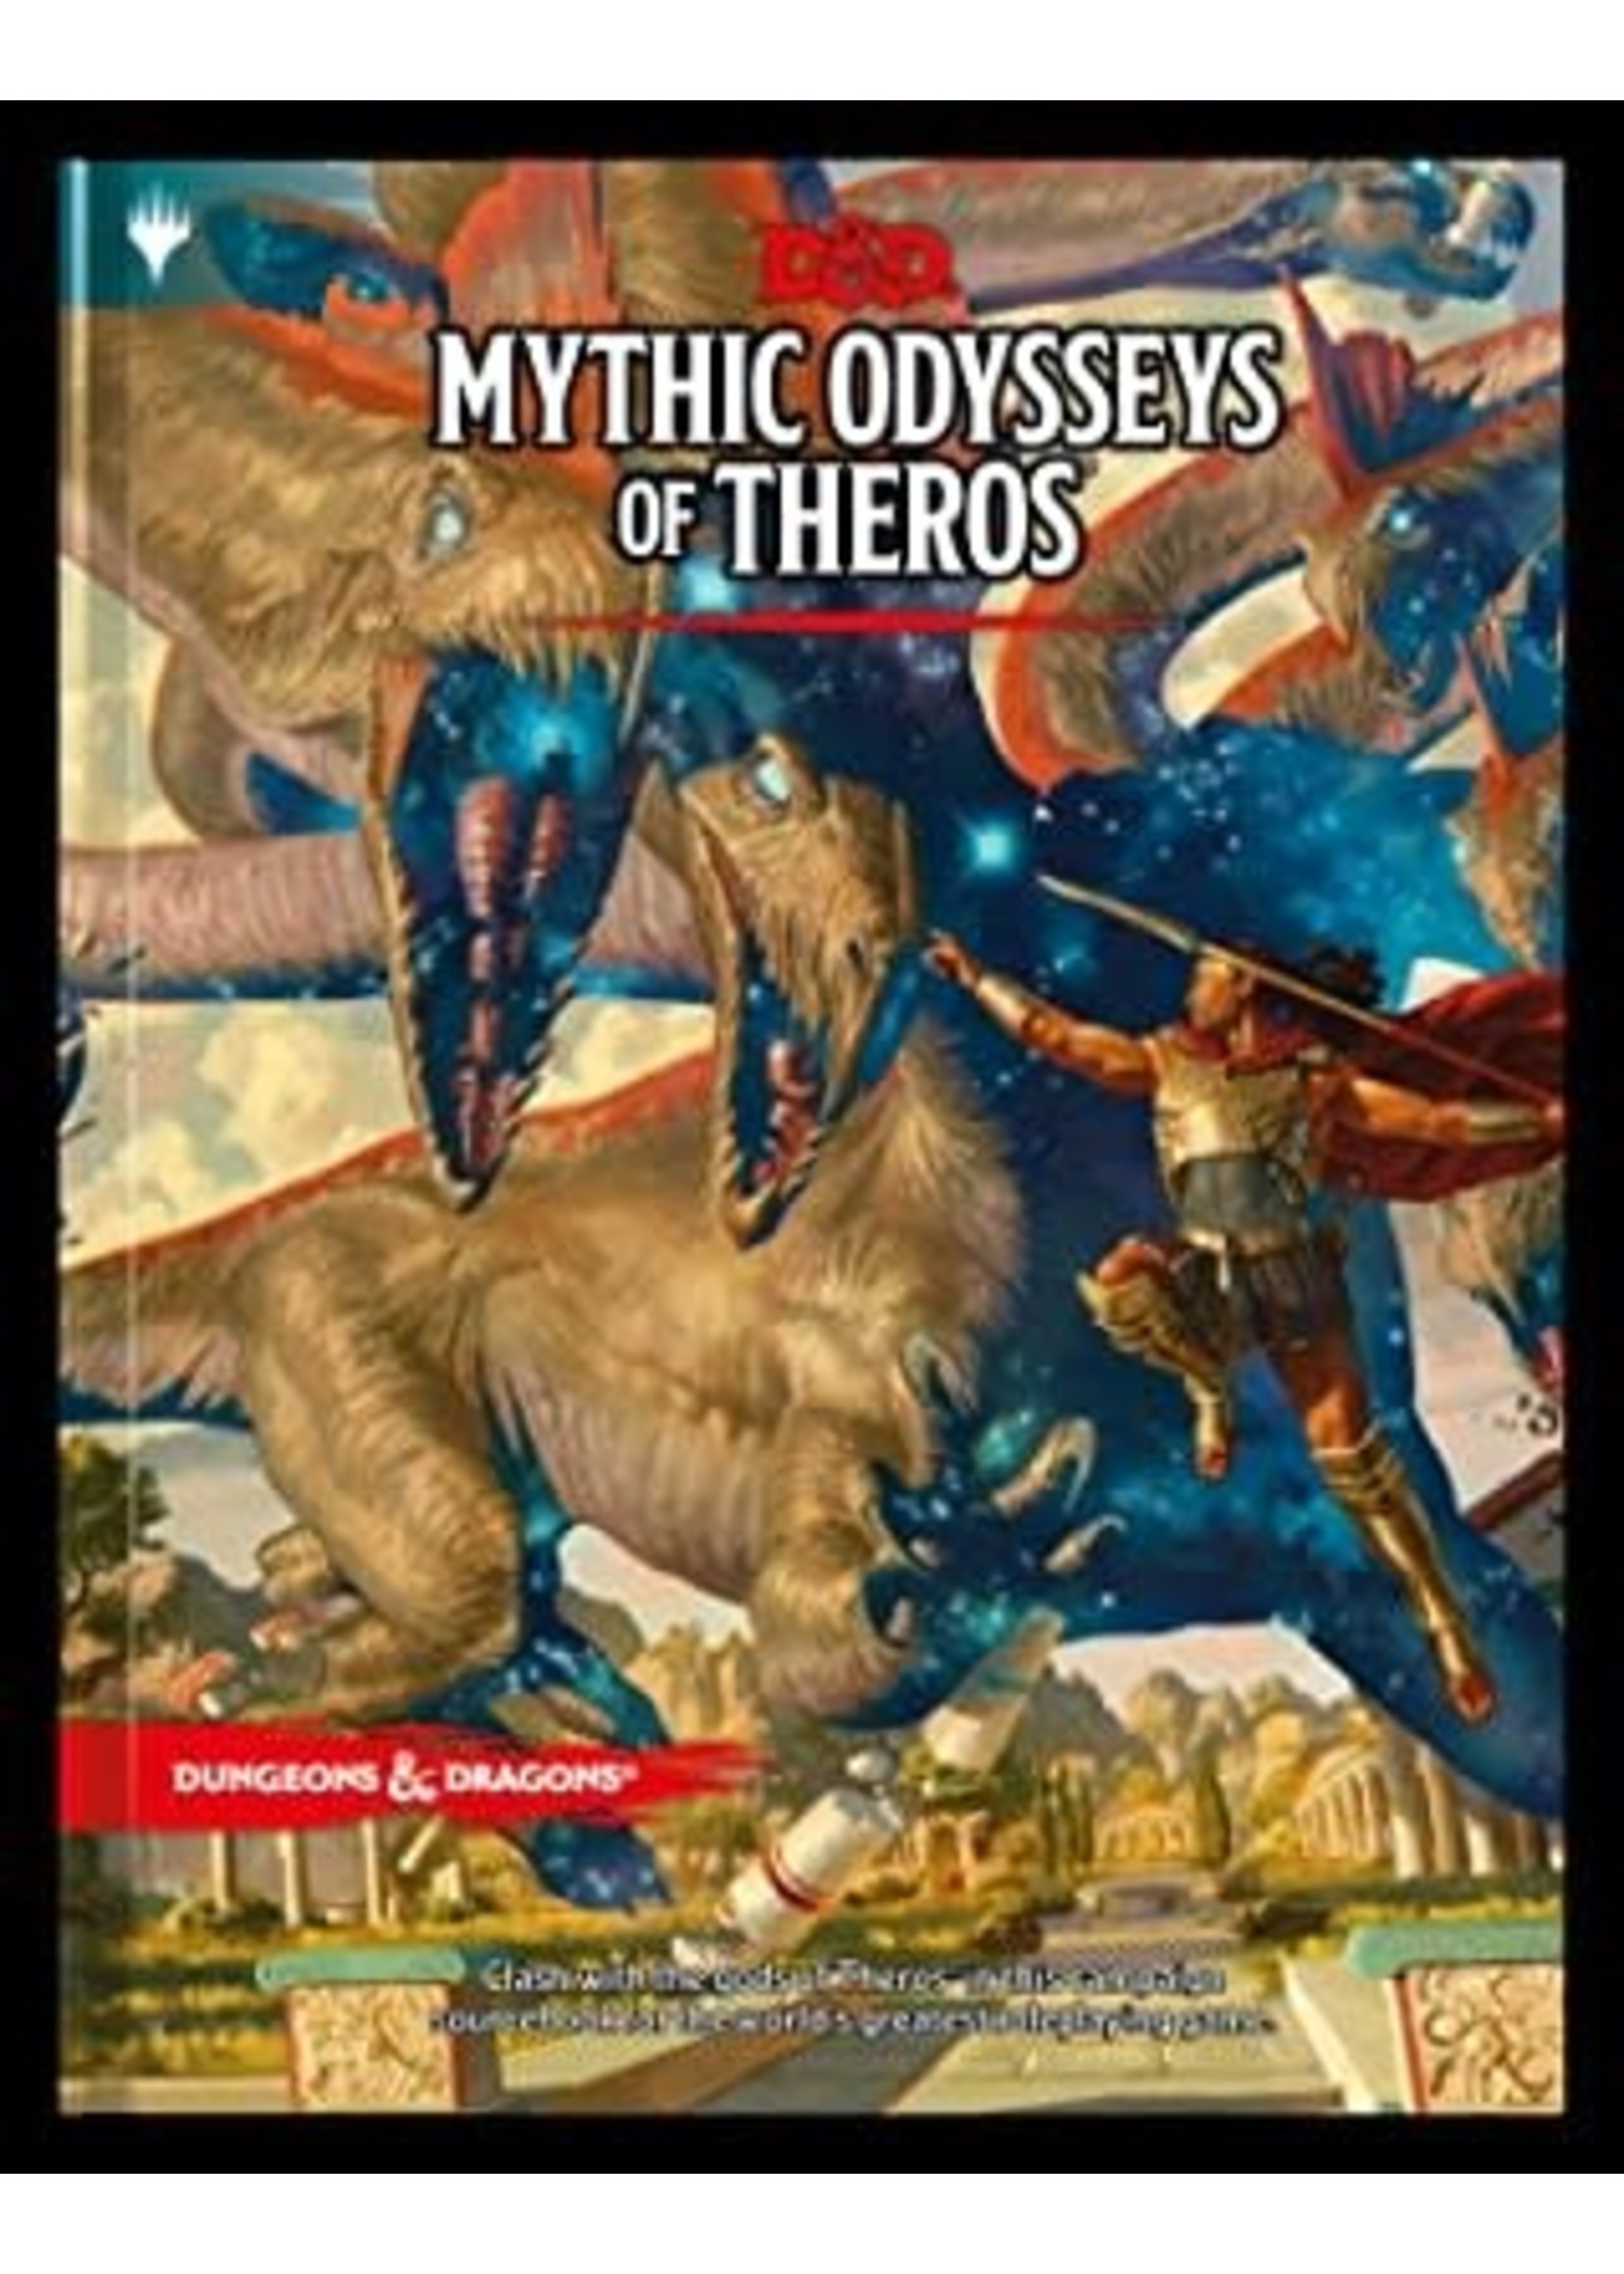 Mythic Odysseys of Theros (Dungeons & Dragons, 5th Edition) by Wizards of the Coast